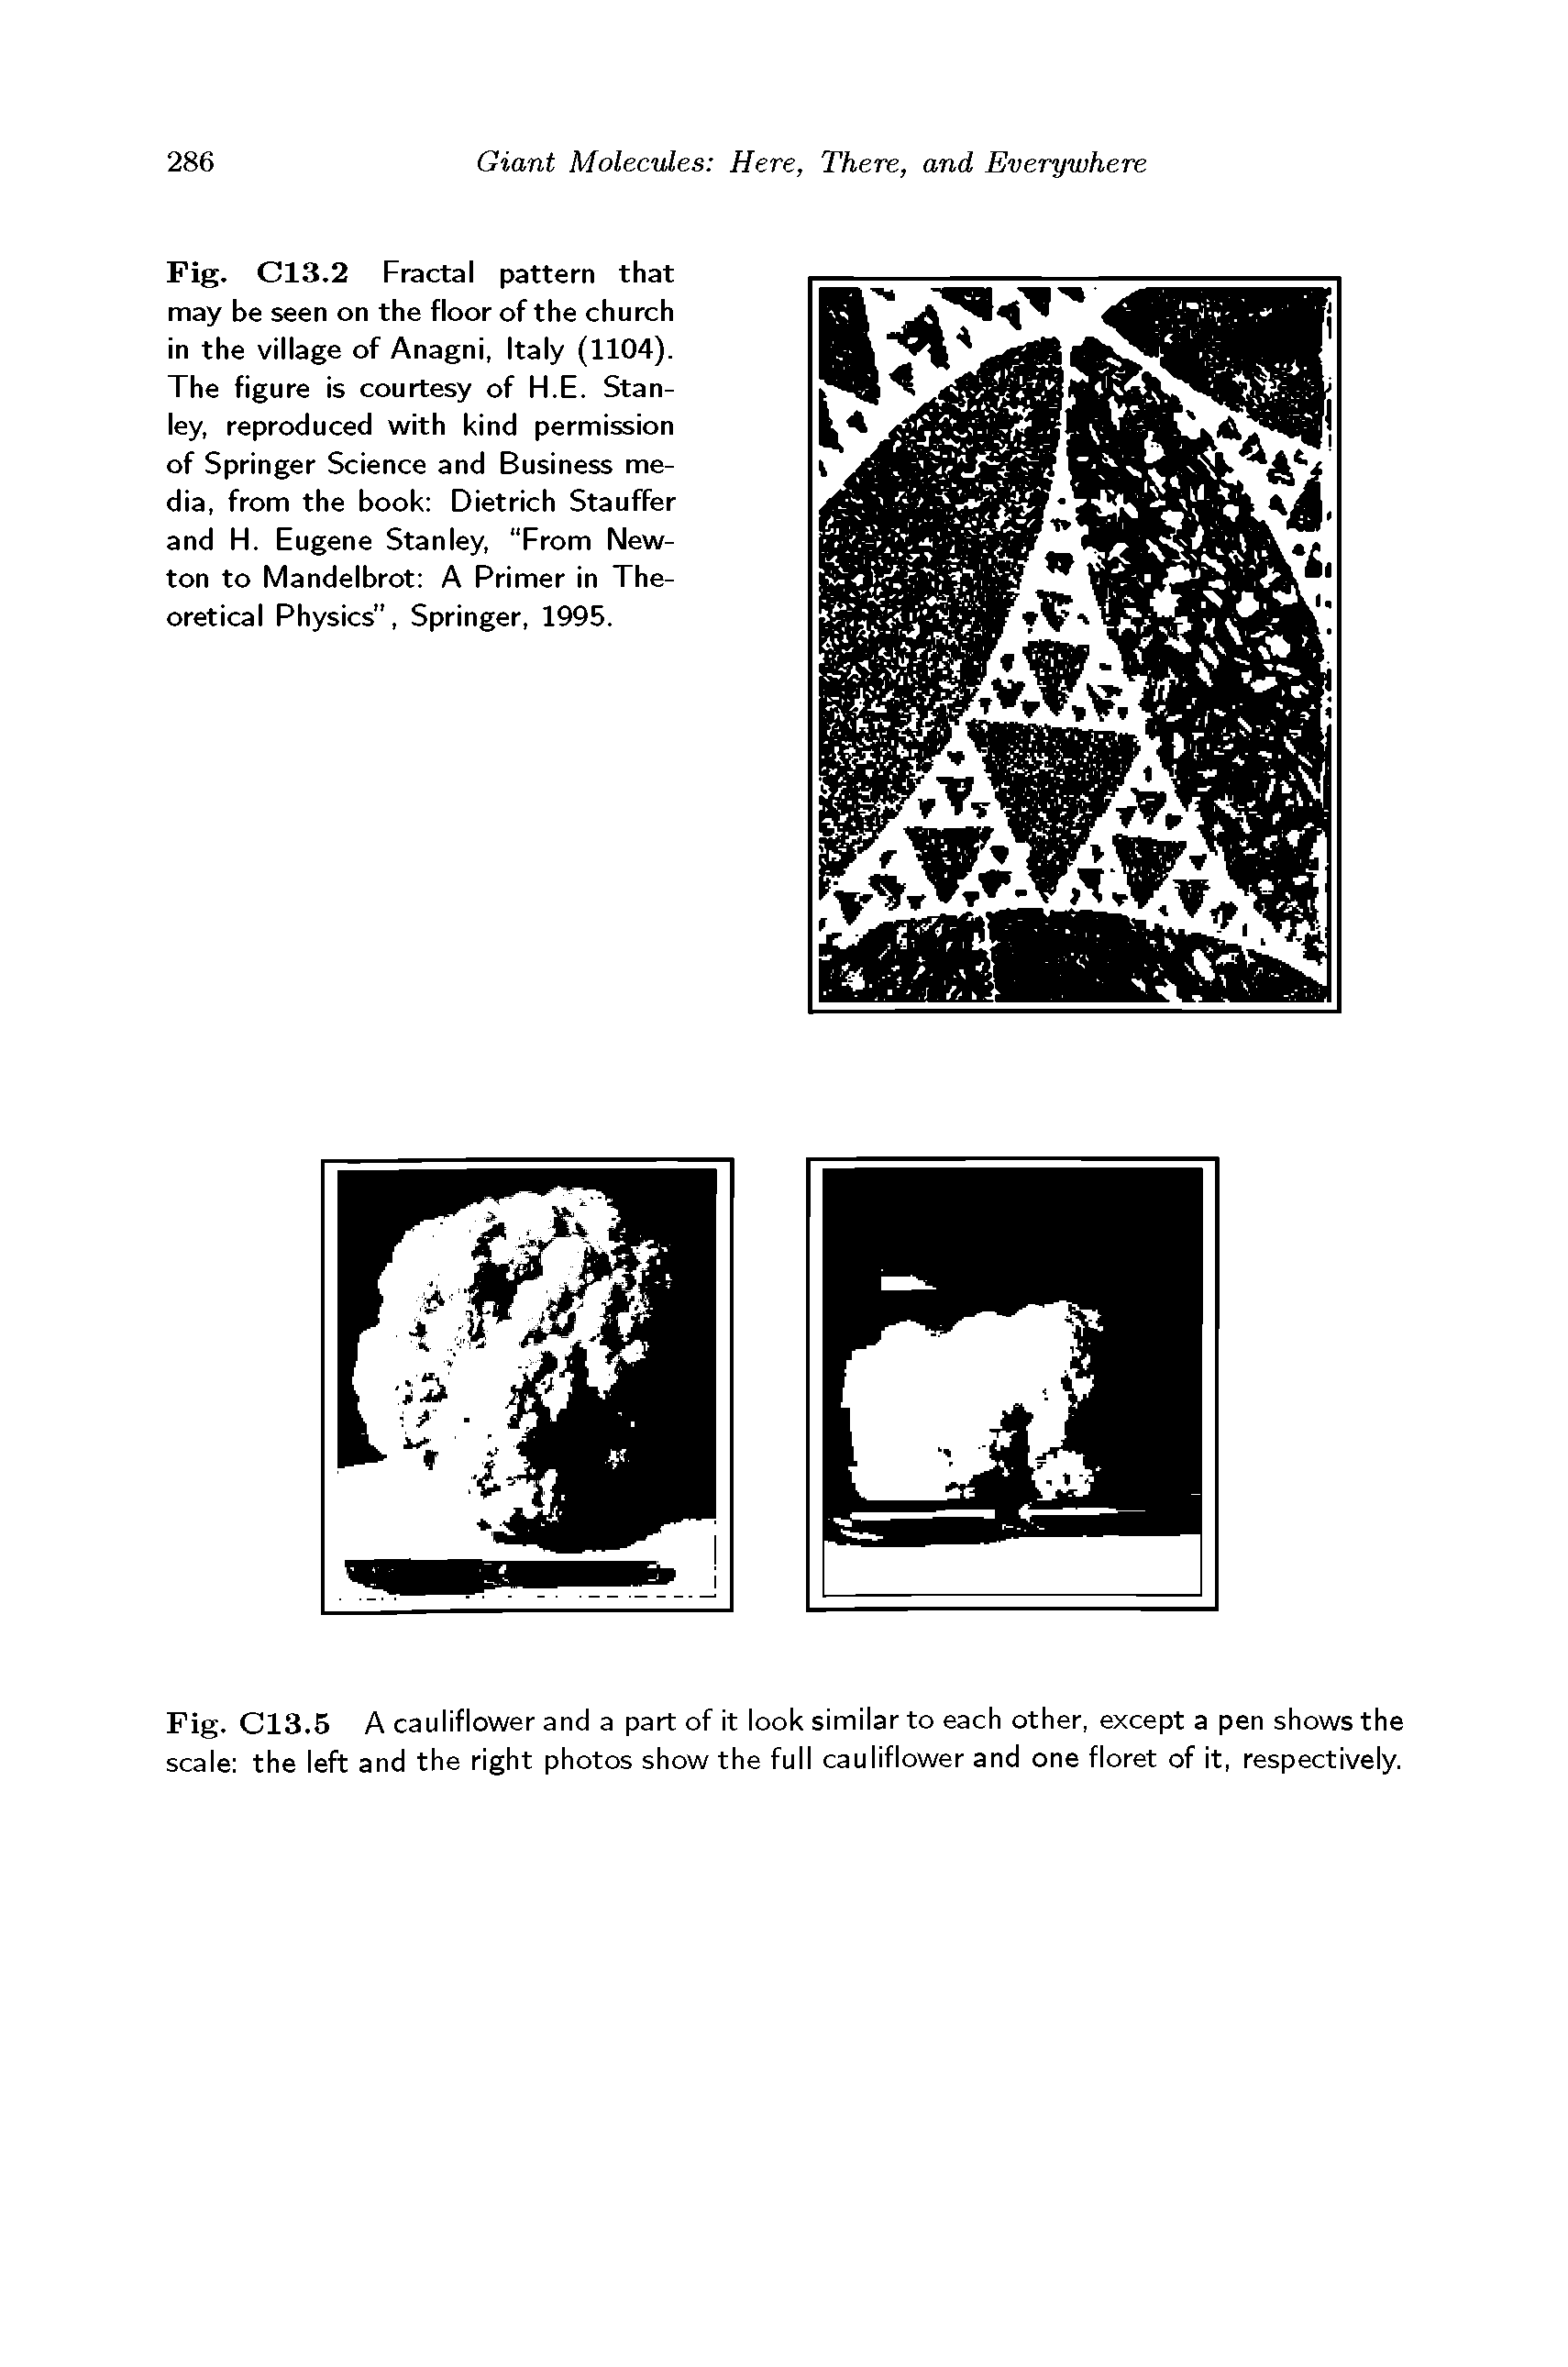 Fig. CIS.2 Fractal pattern that may be seen on the floor of the church in the village of Anagni, Italy (1104). The figure is courtesy of H.E. Stanley, reproduced with kind permission of Springer Science and Business media, from the book Dietrich Stauffer and H. Eugene Stanley, From Newton to Mandelbrot A Primer in Theoretical Physics , Springer, 1995.